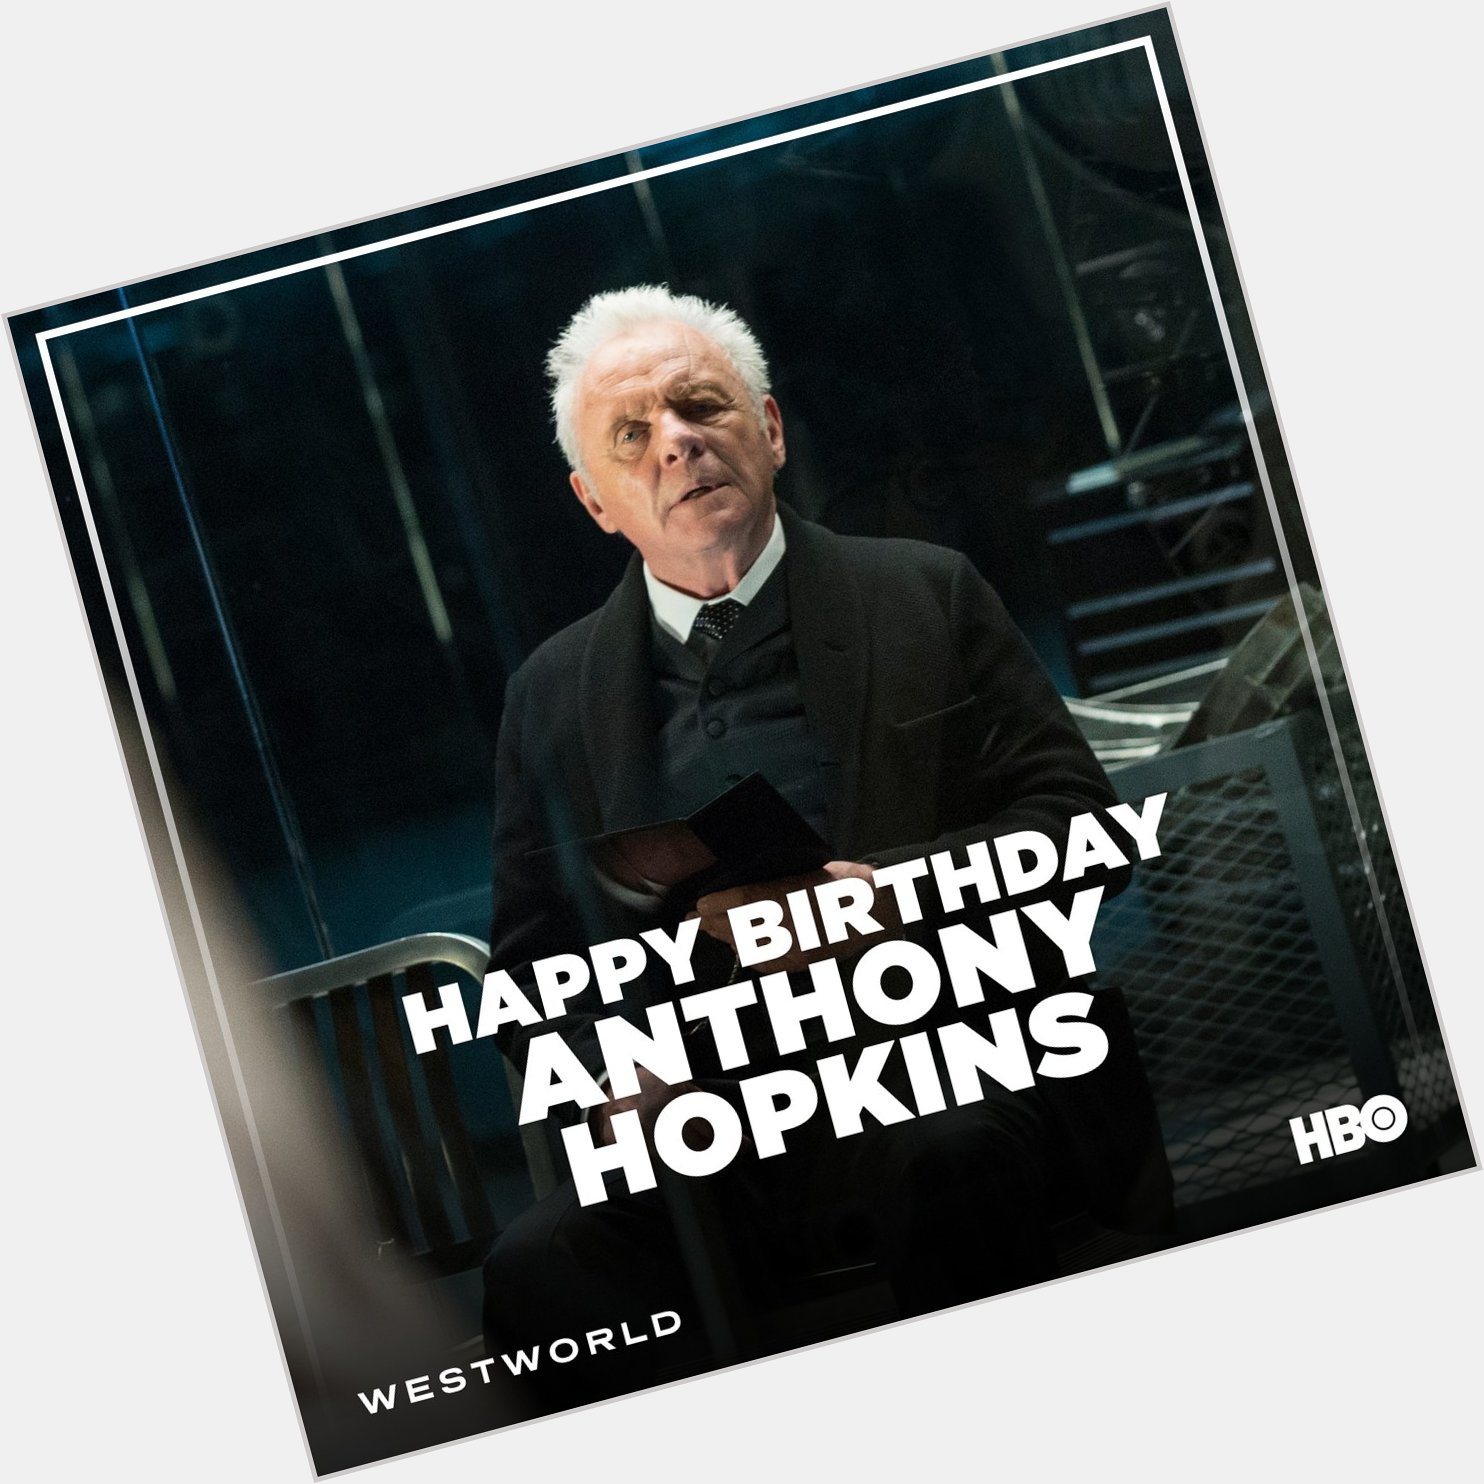 Anthony Hopkins turns 85 today, leave a to wish him a Happy Birthday! 